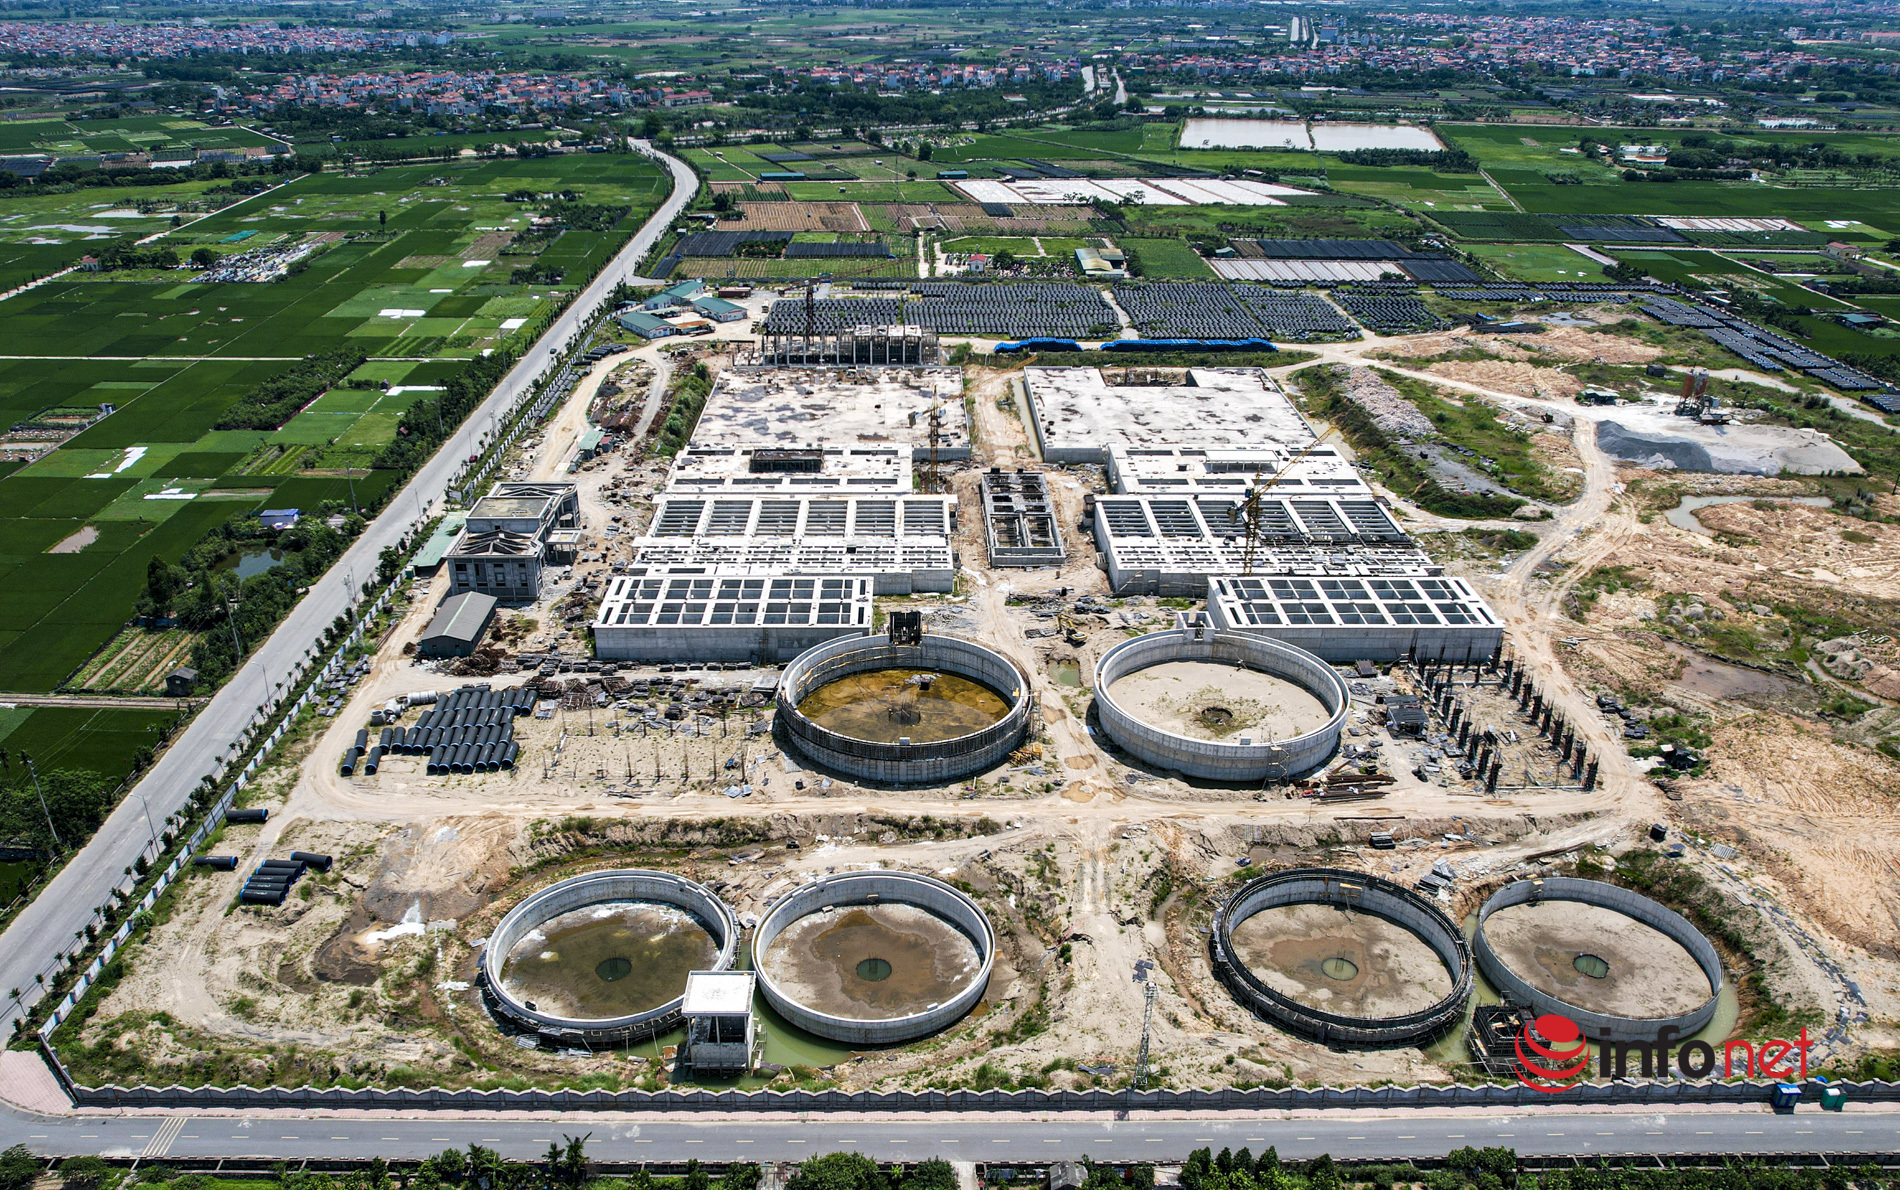 Hanoi: The 3,700 billion water plant is 4 years behind schedule, the construction site is sprawling and empty of workers